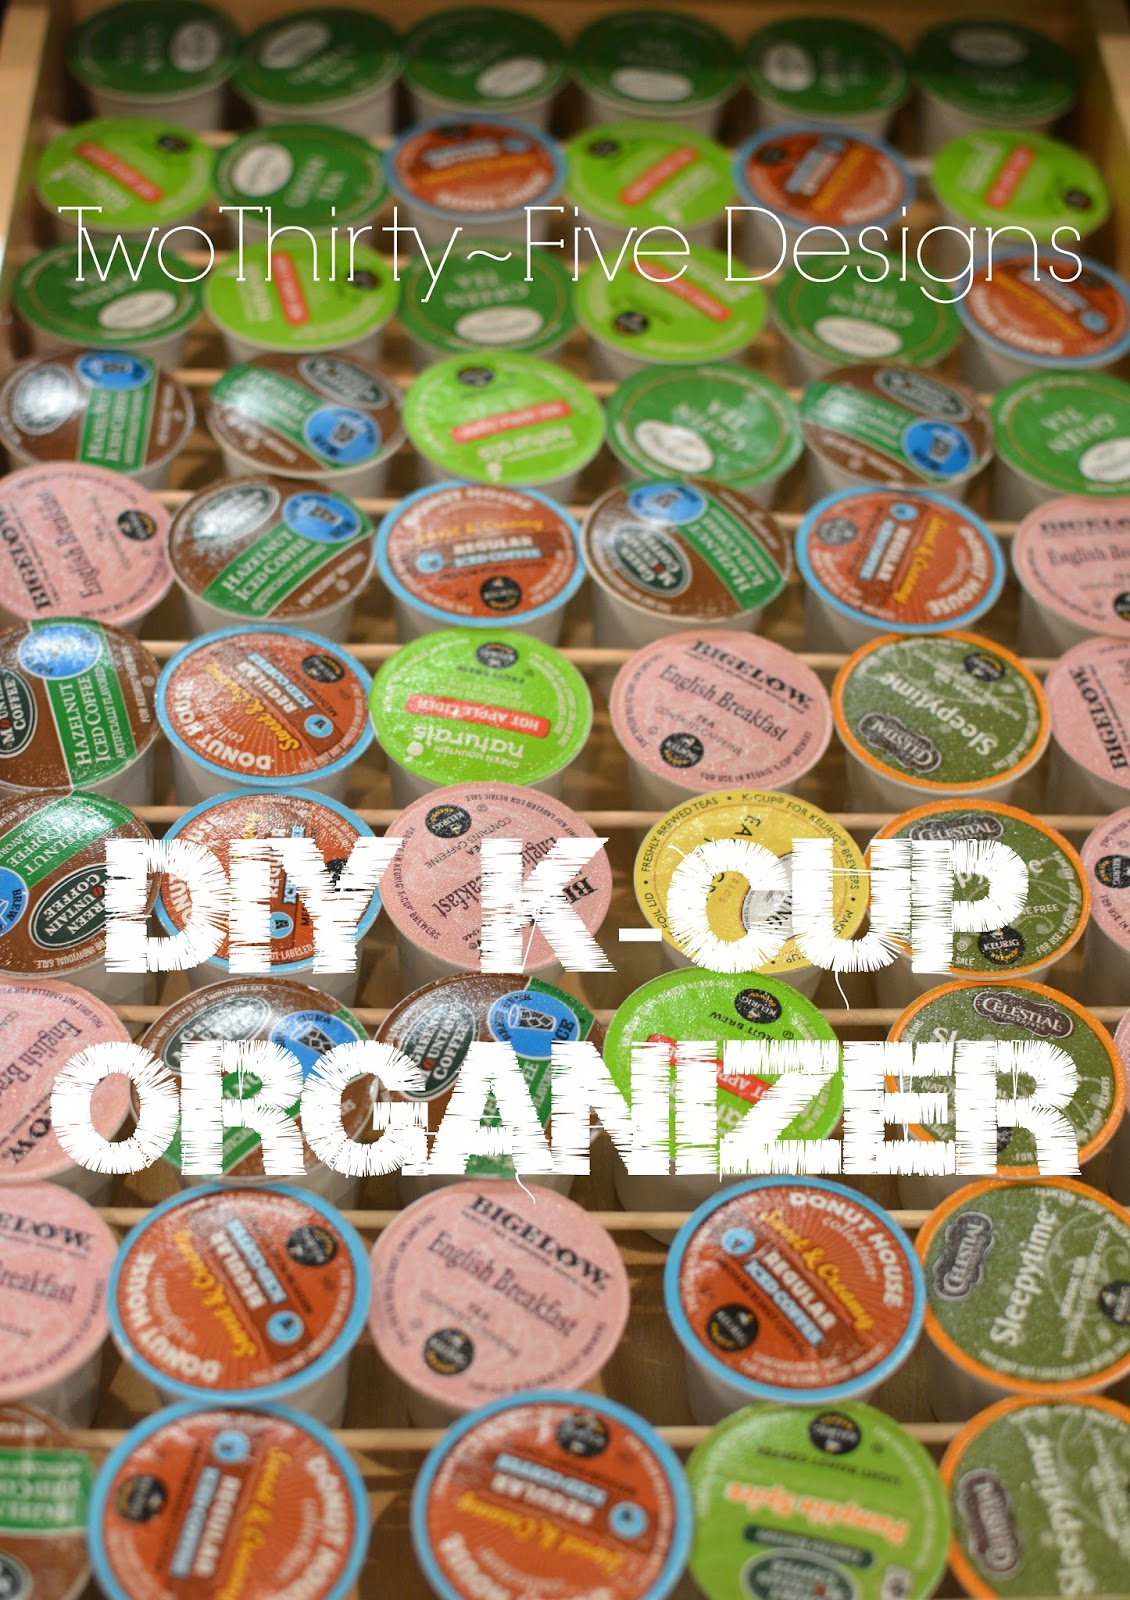 K Cup Storage + Organization Ideas - Peas and Crayons